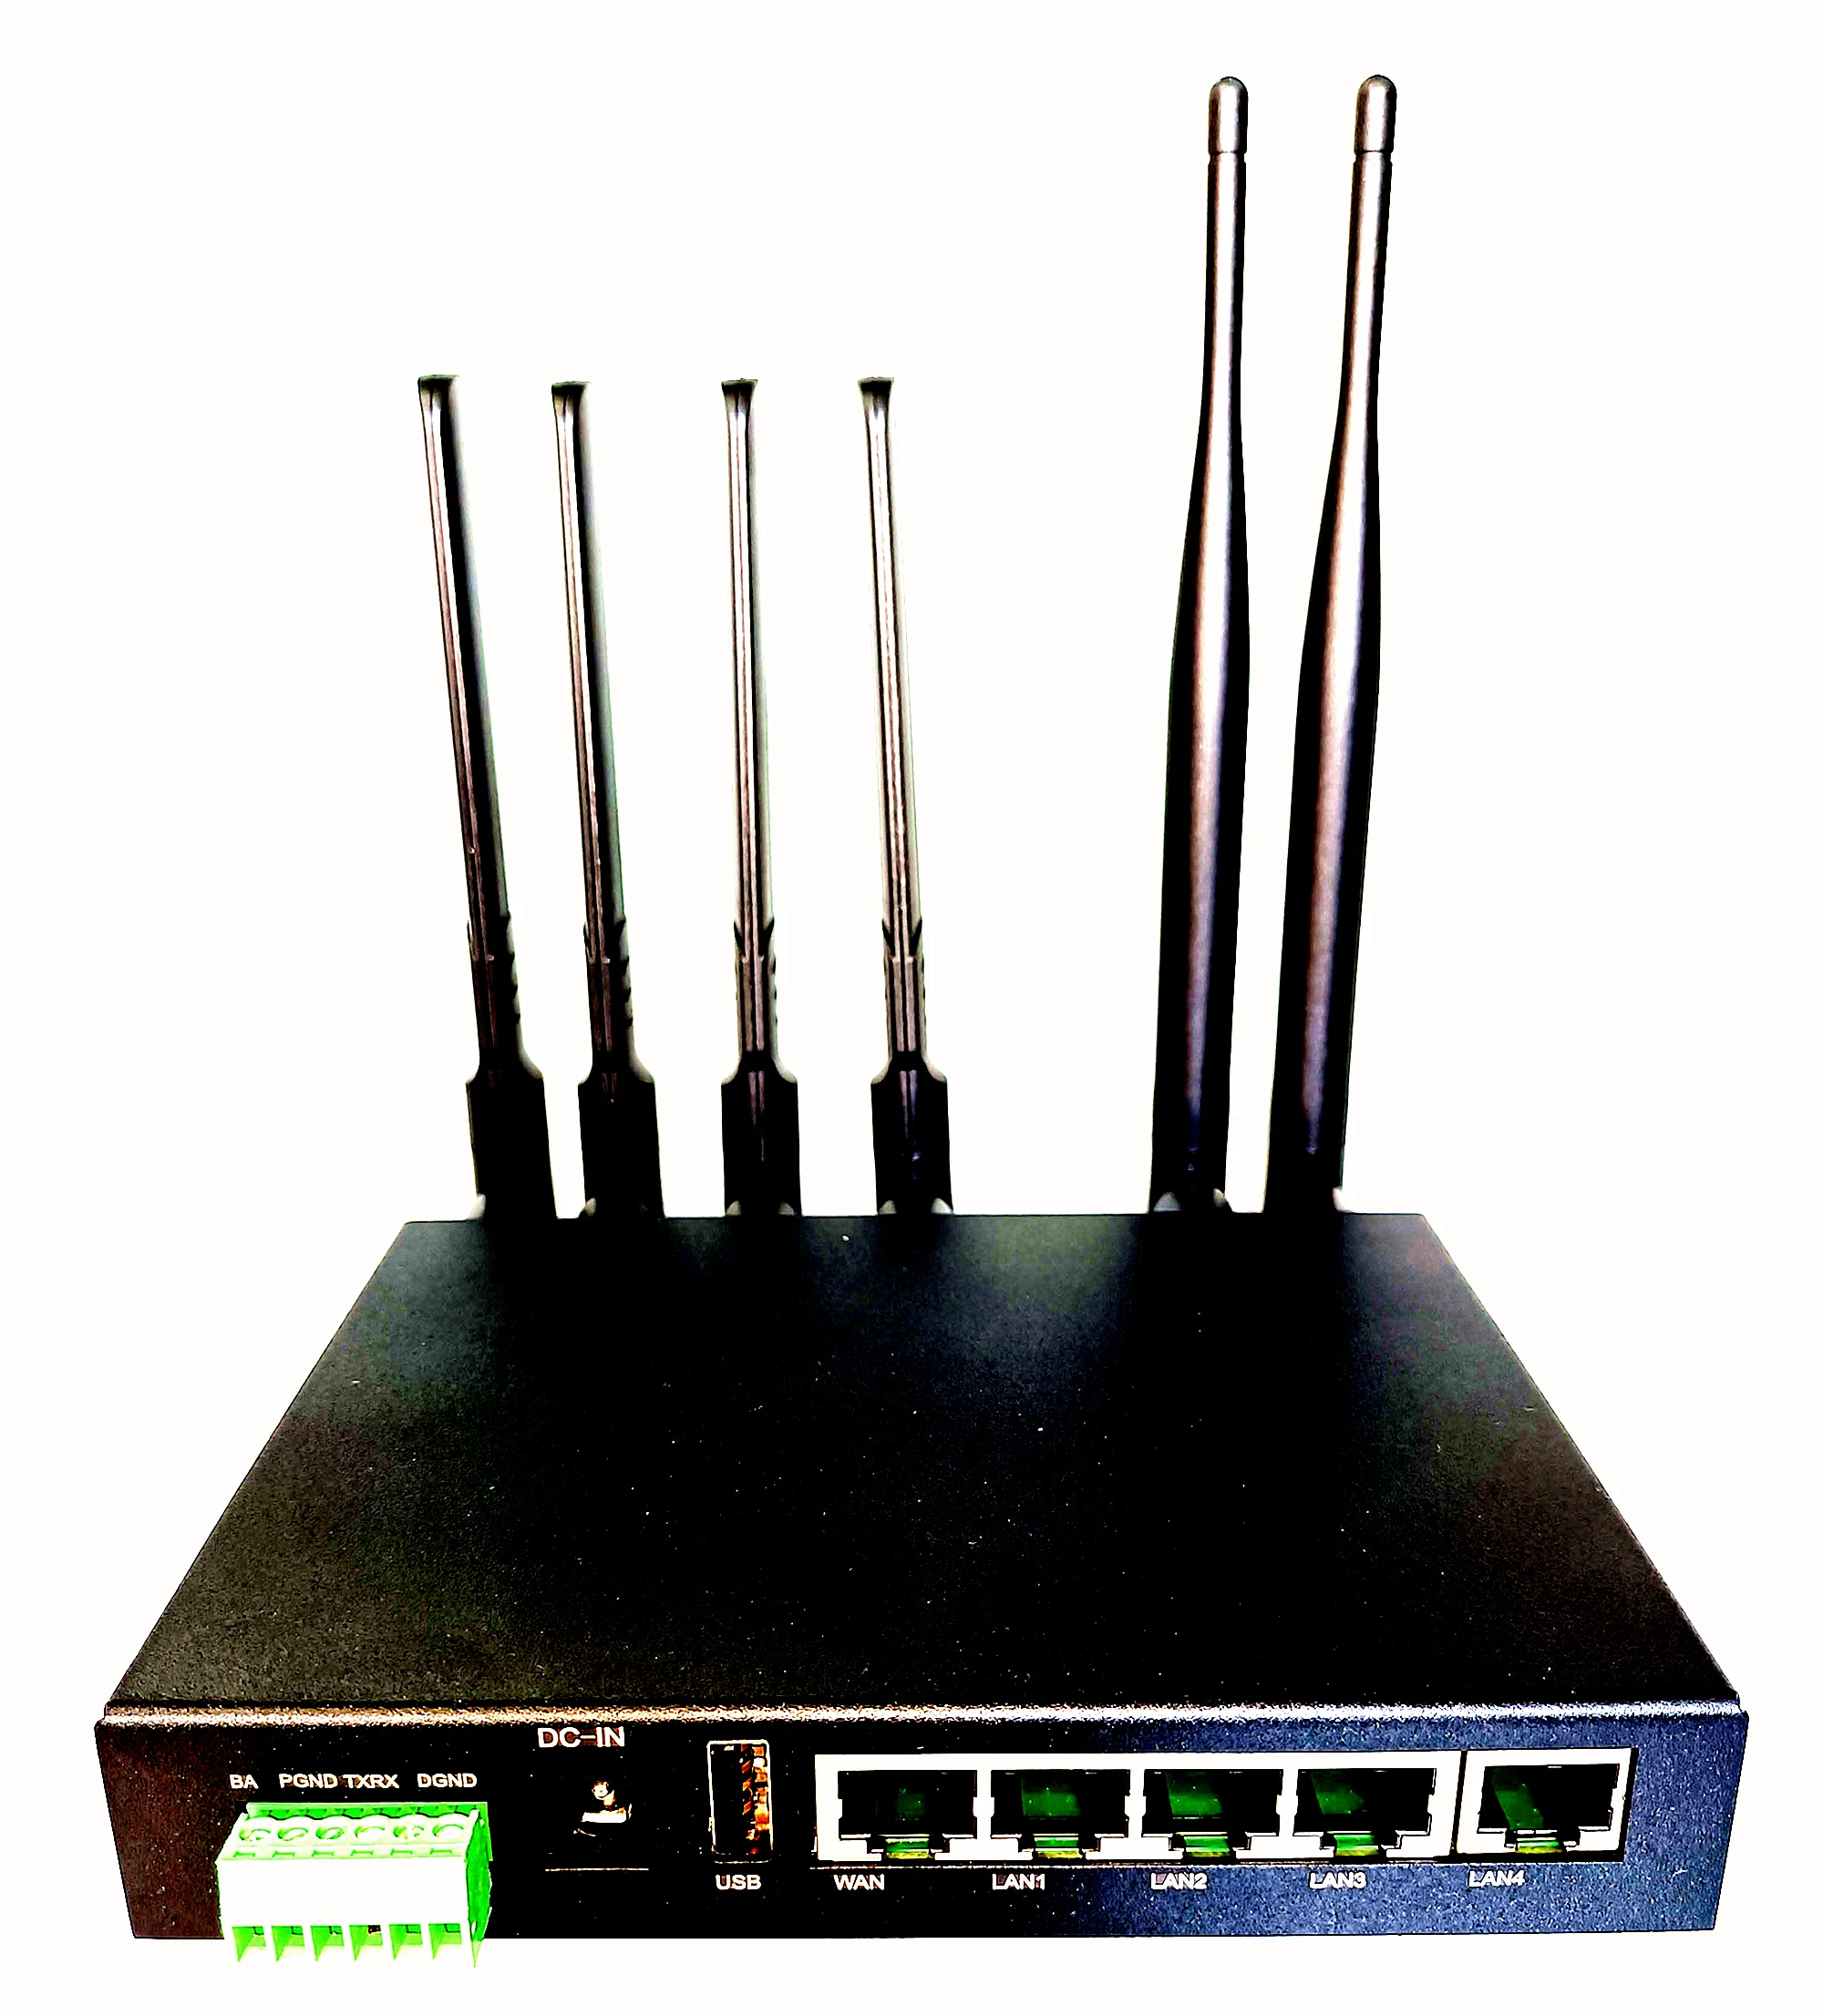 
5G NR bands CPE Industrial router 1.2Gbps high speed gateway with dual SIM for advanced speed applications 